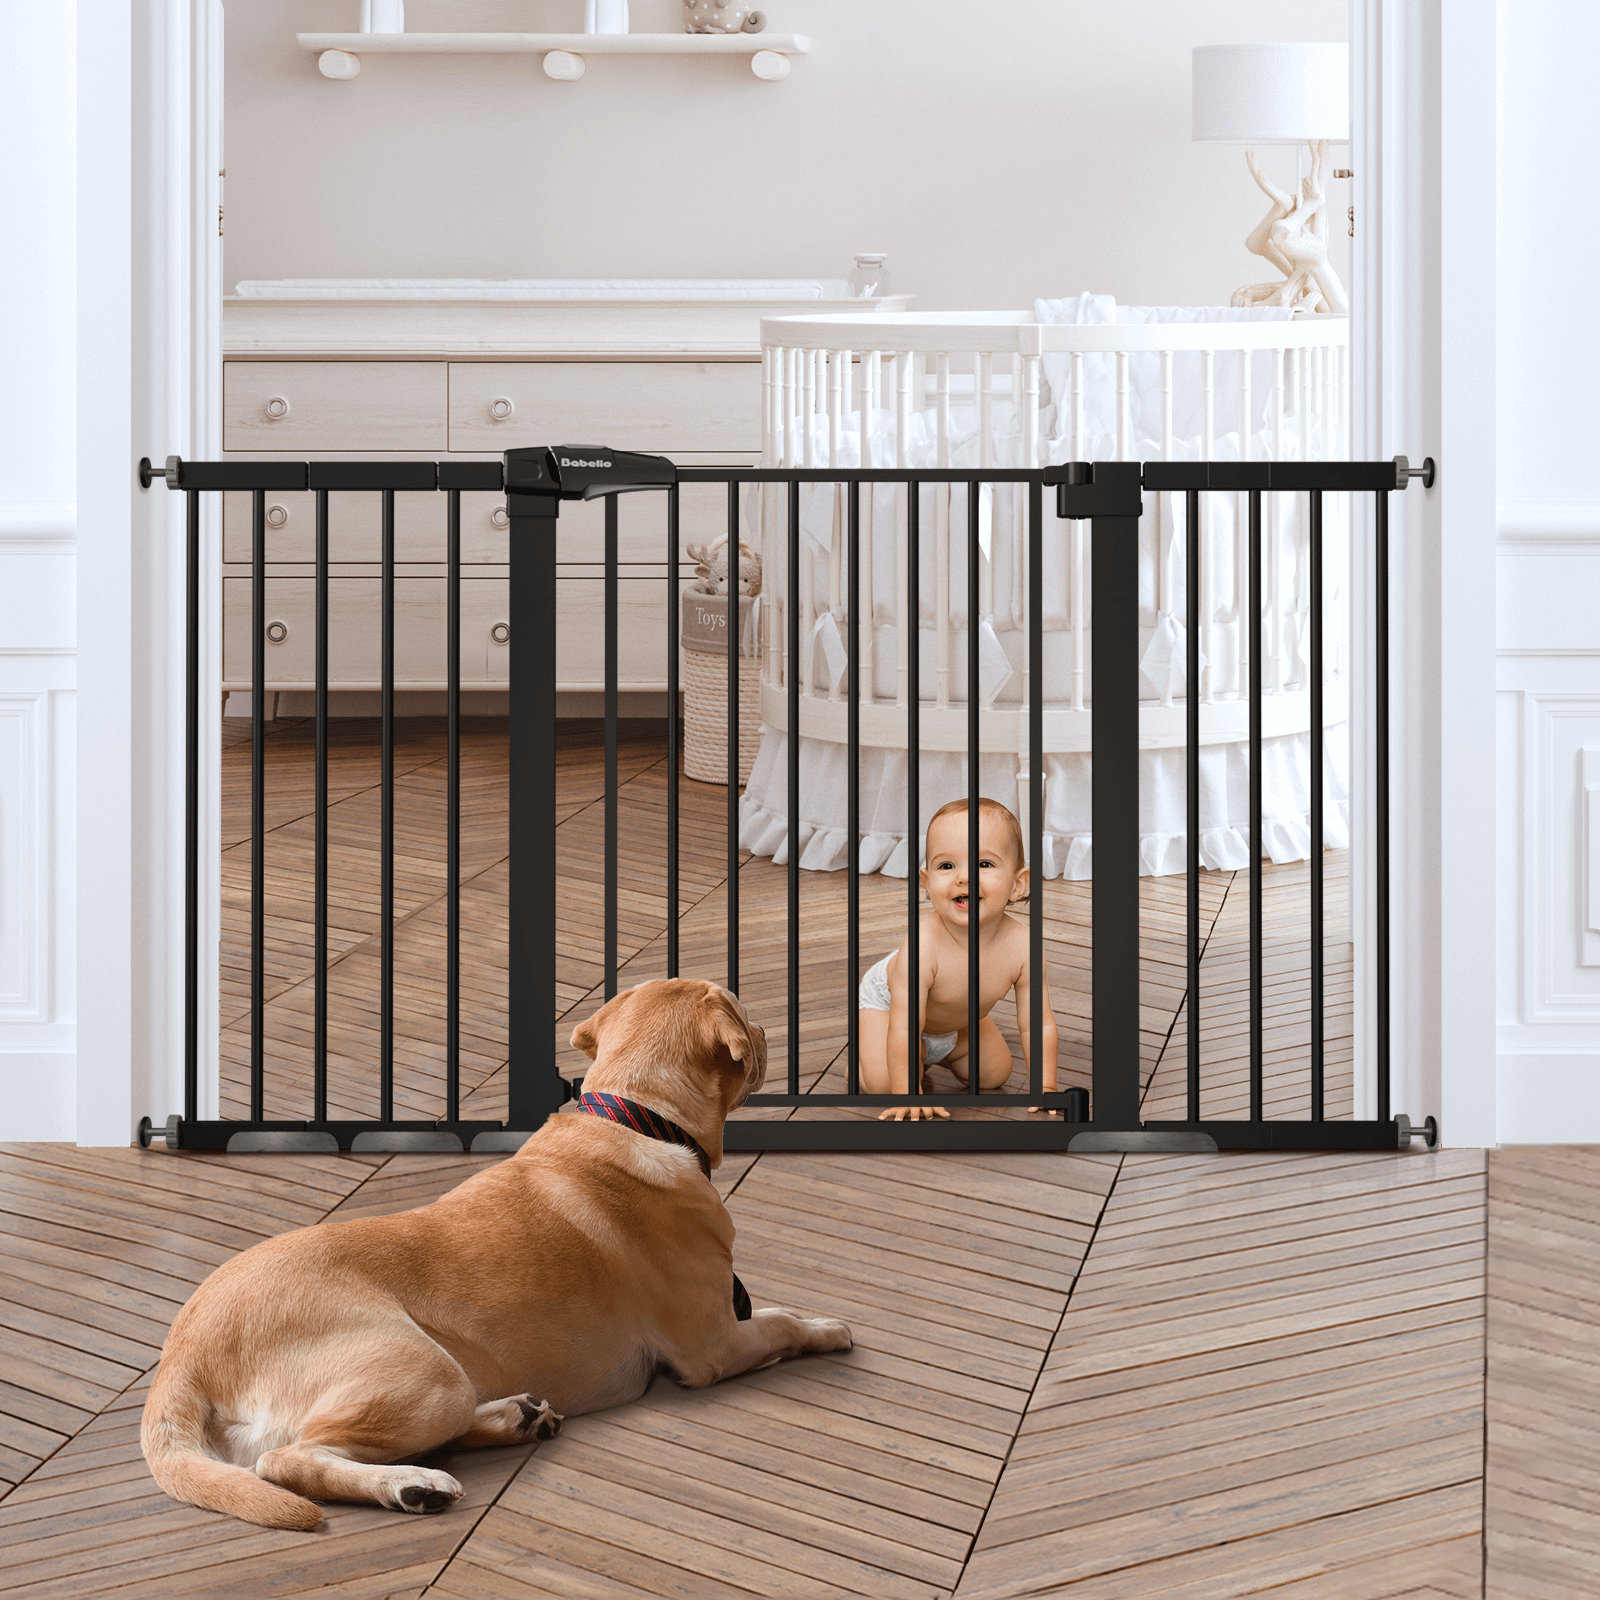 BABELIO Adjustable 29-55" Wide Safety Gate – Durable Metal Baby and Pet Gate, Pressure Mount for Stairs & Doorways